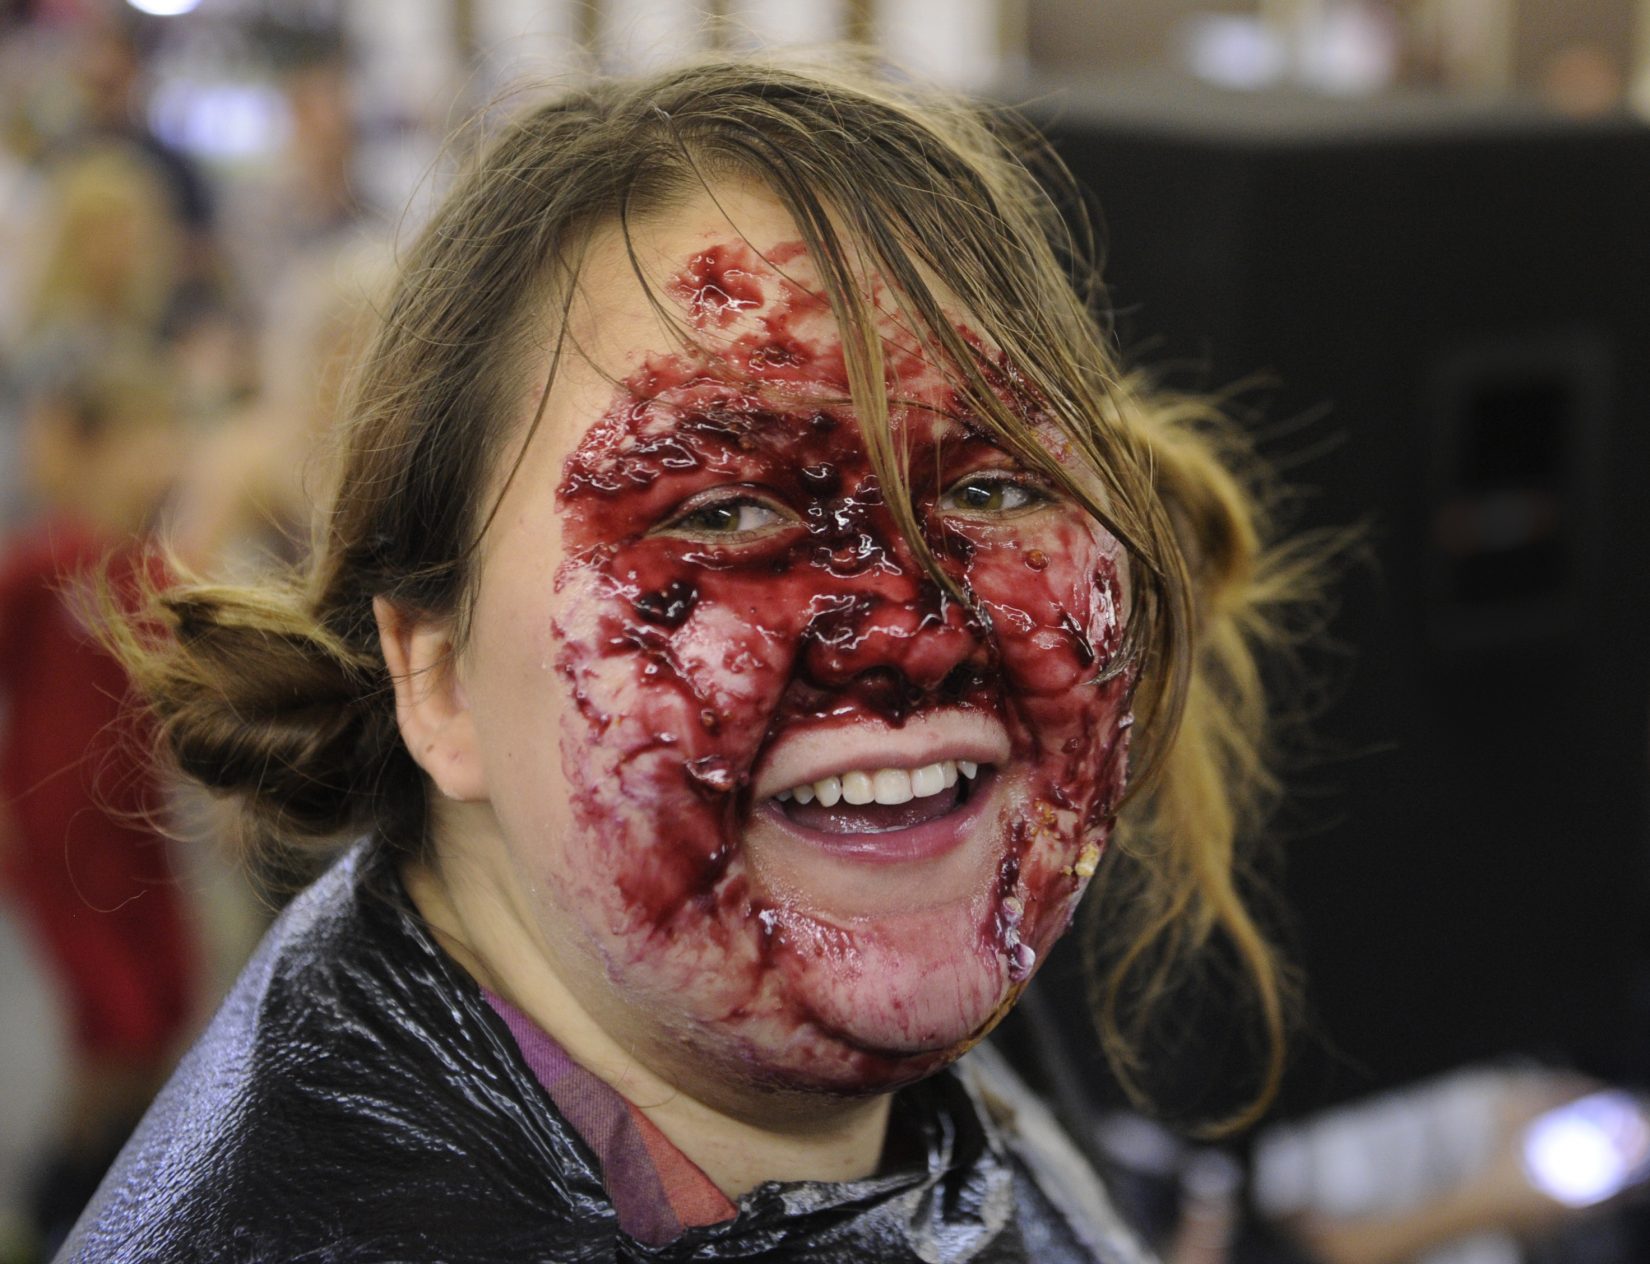 If this is how one competitor looked after the Denver County Fair's no-hands pie eating contest, how will the contestants in a Doritos-eating contest look after the fair's 2014 installment?